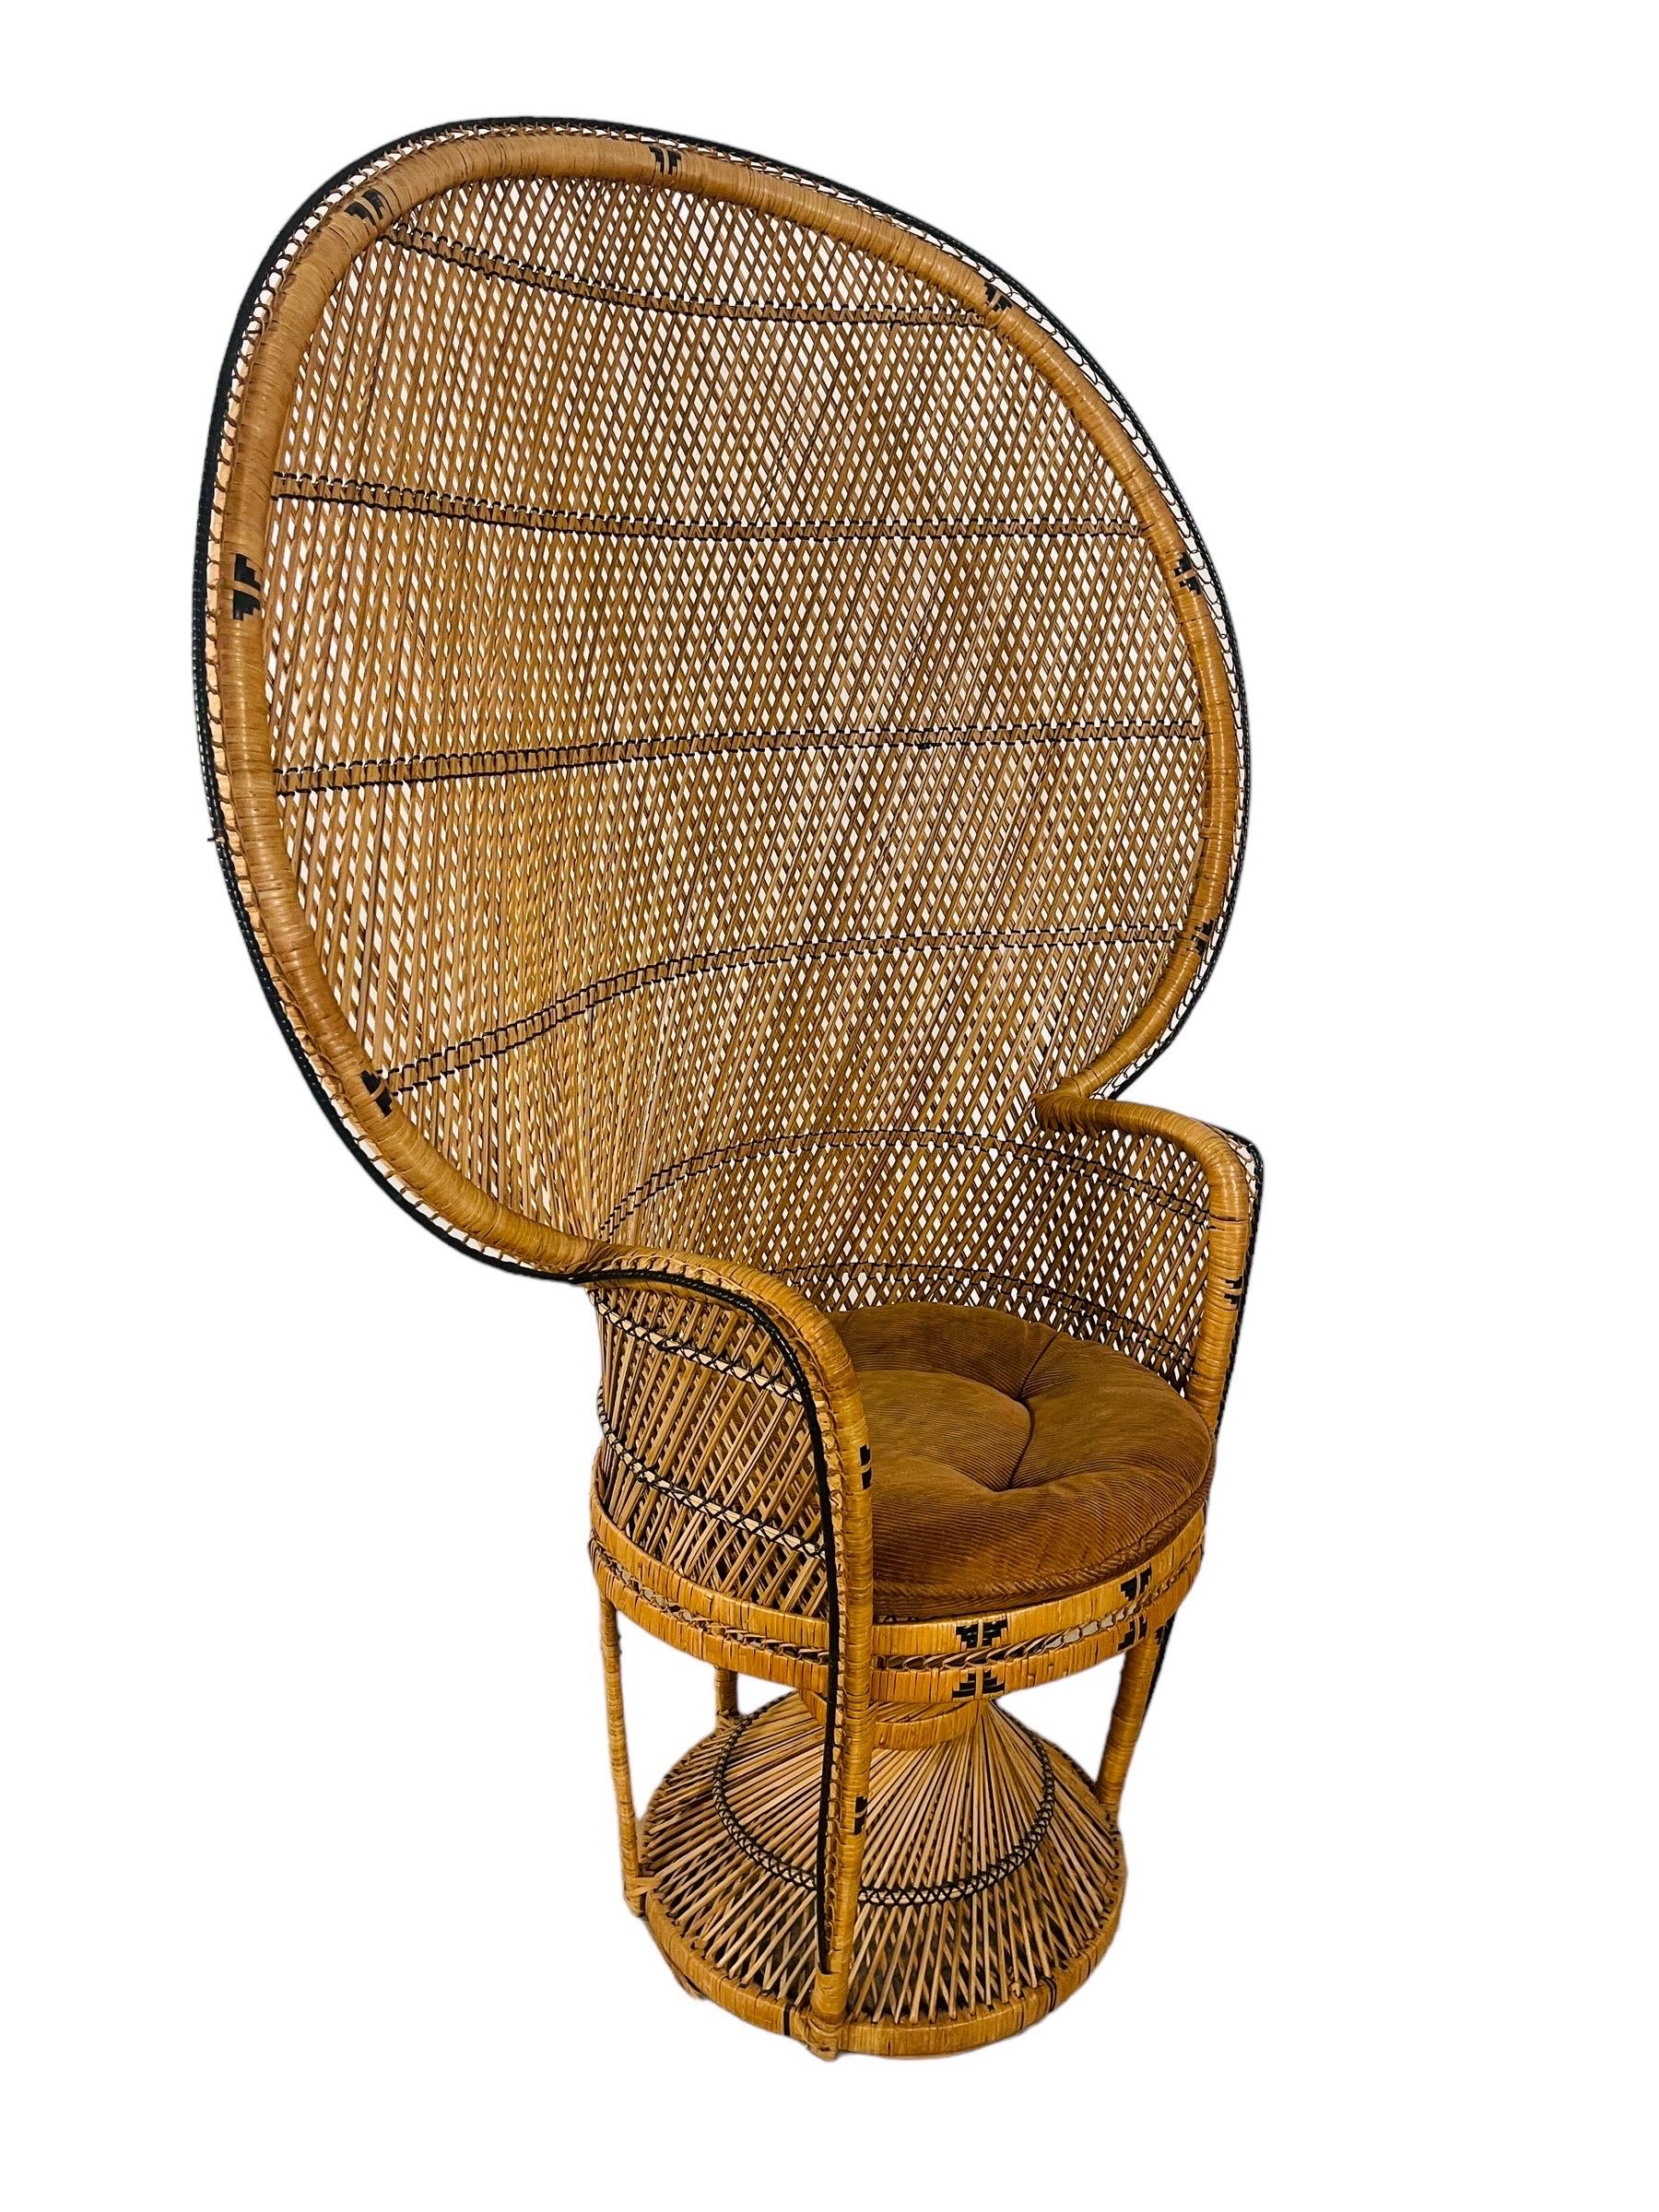 Vintage Boho Chic Wicker, Rattan Peacock Chair For Sale 4